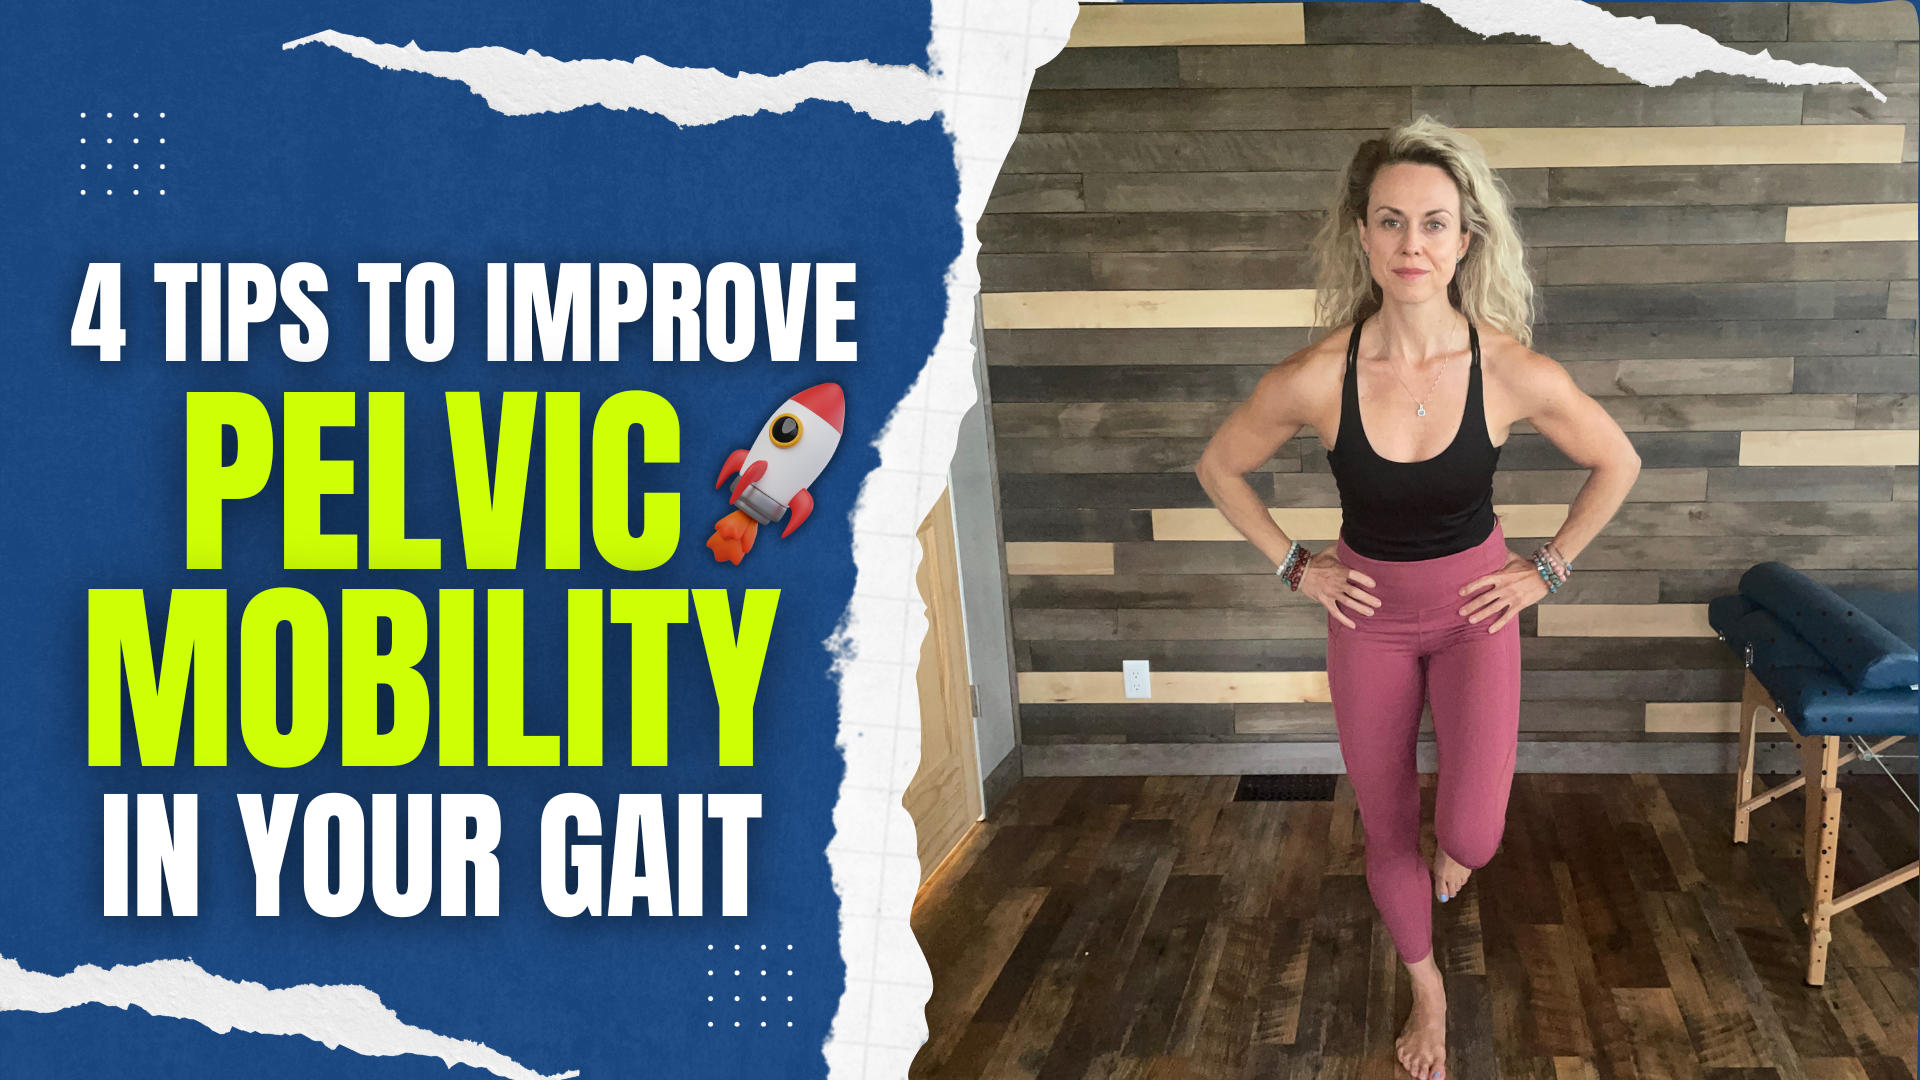 4 ways to improve pelvic mobility in your gait